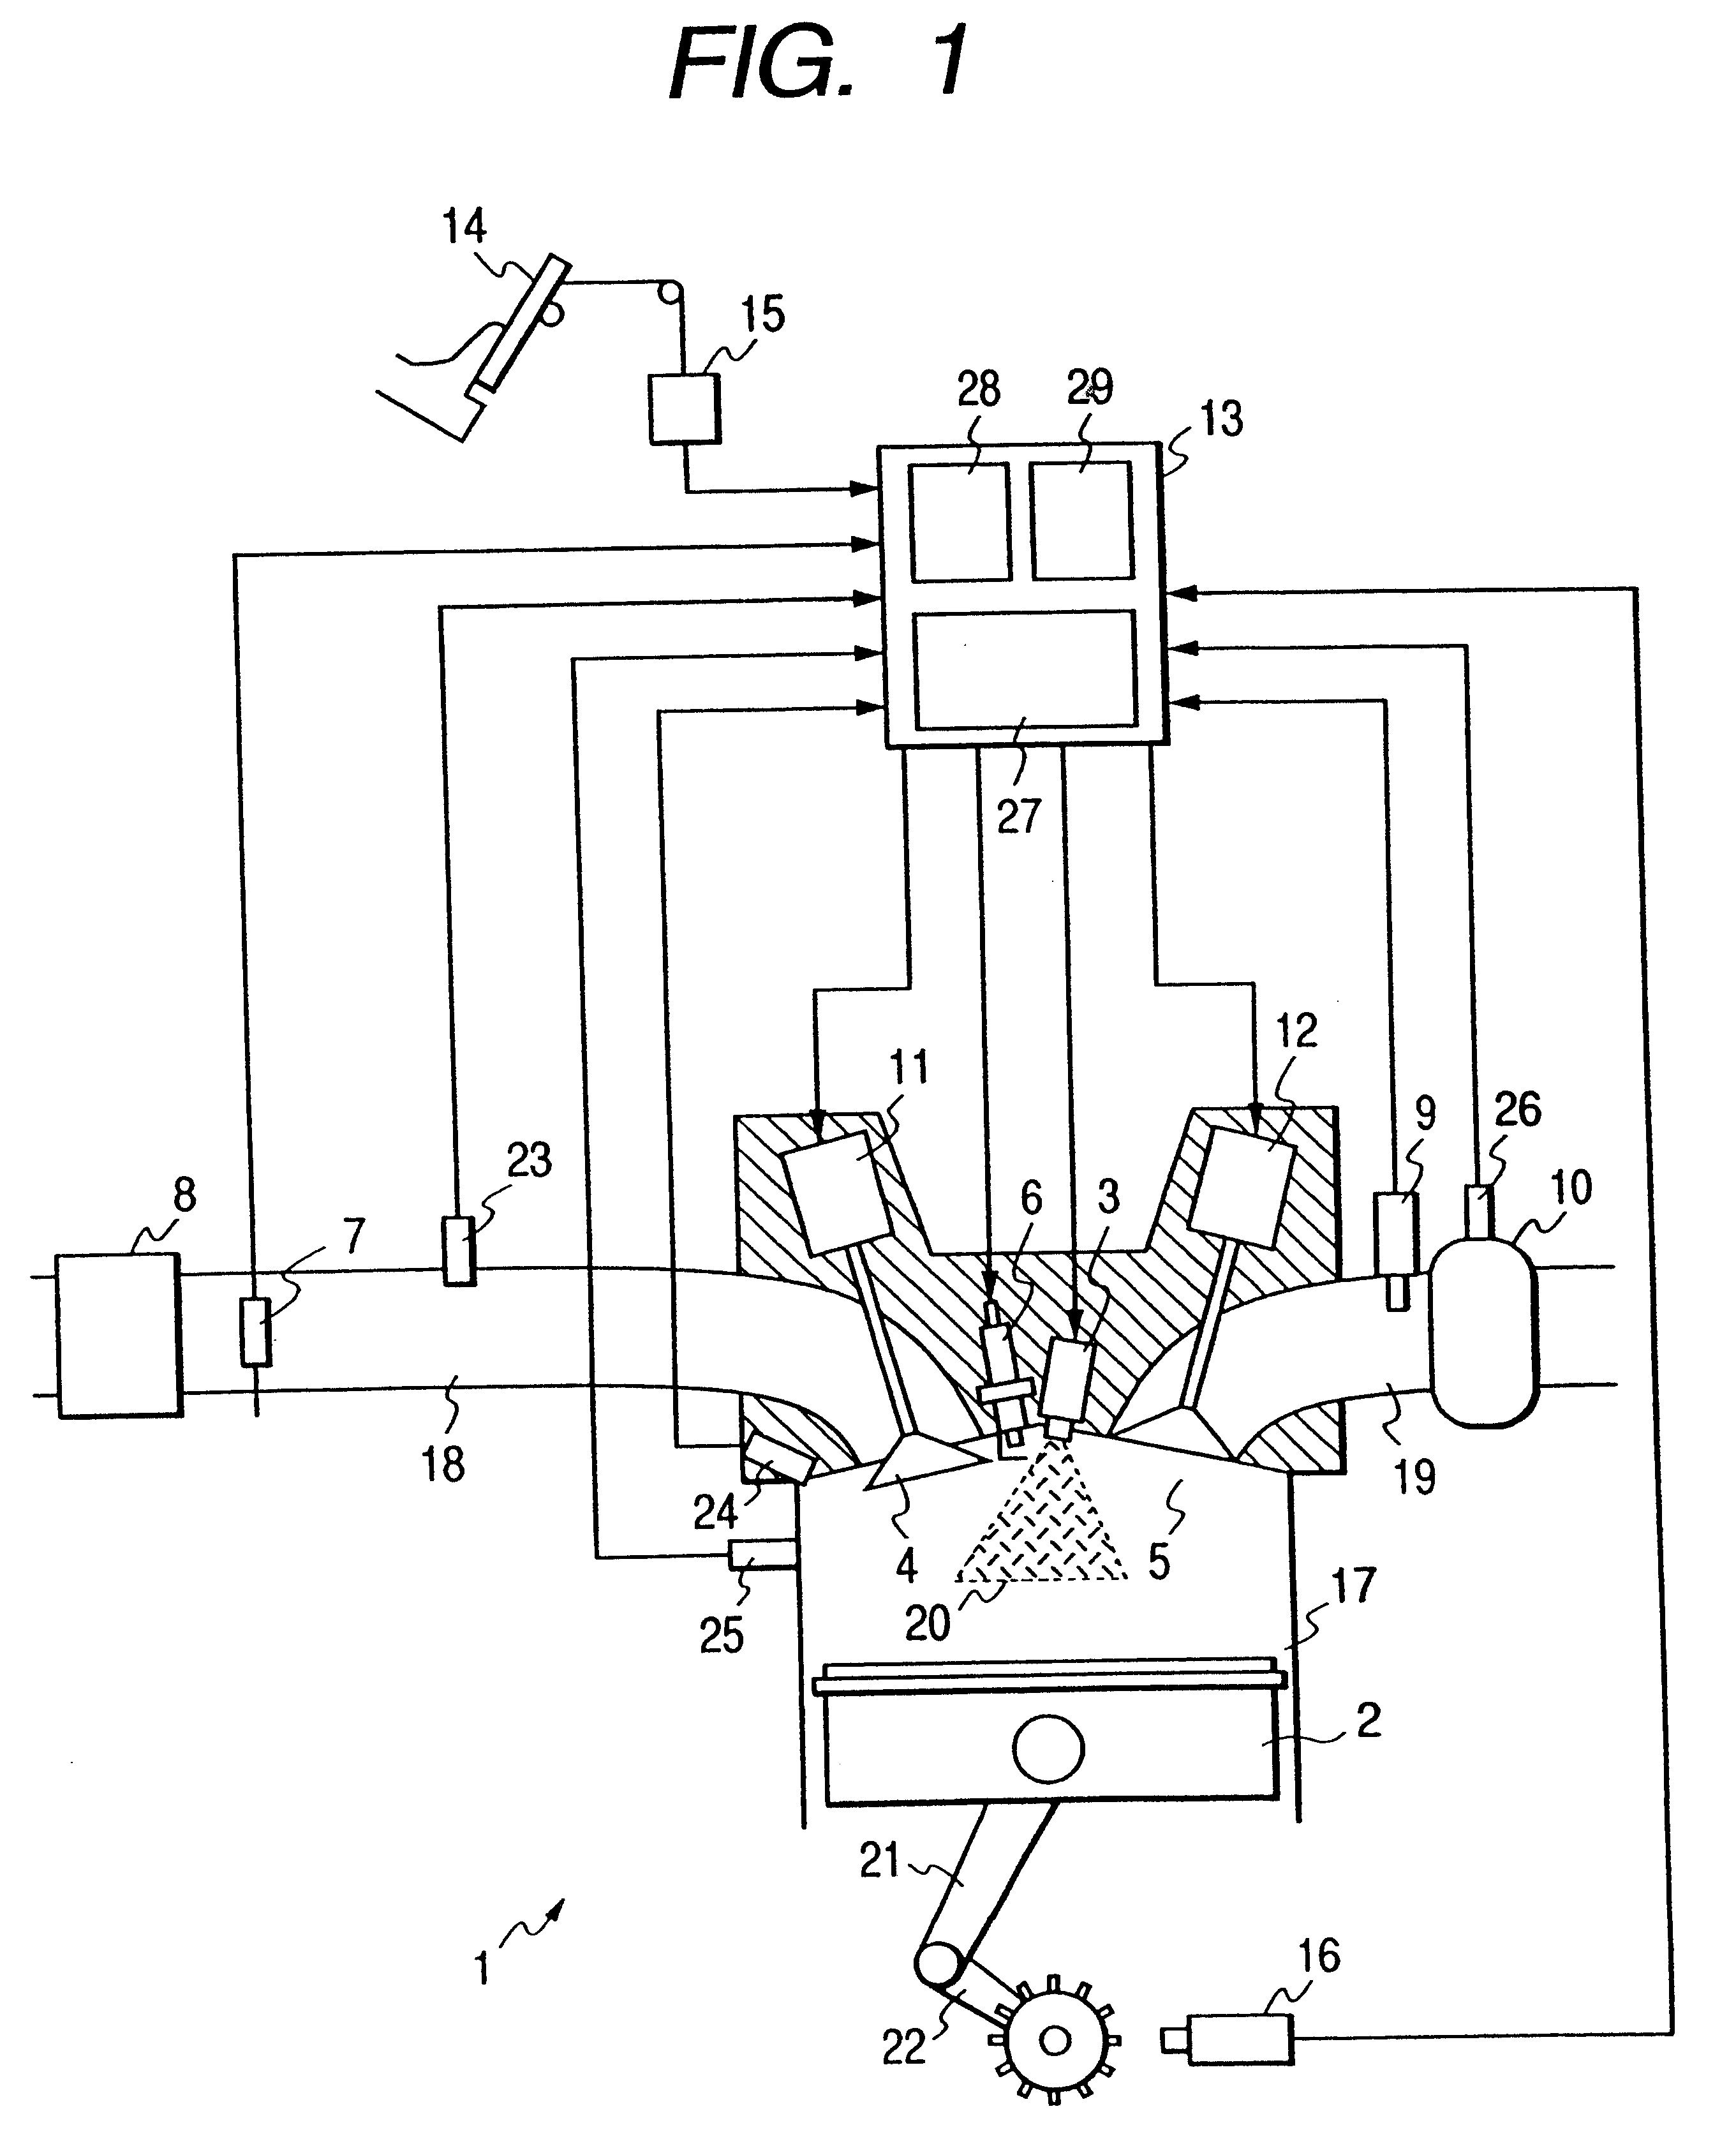 Internal combustion engine control system